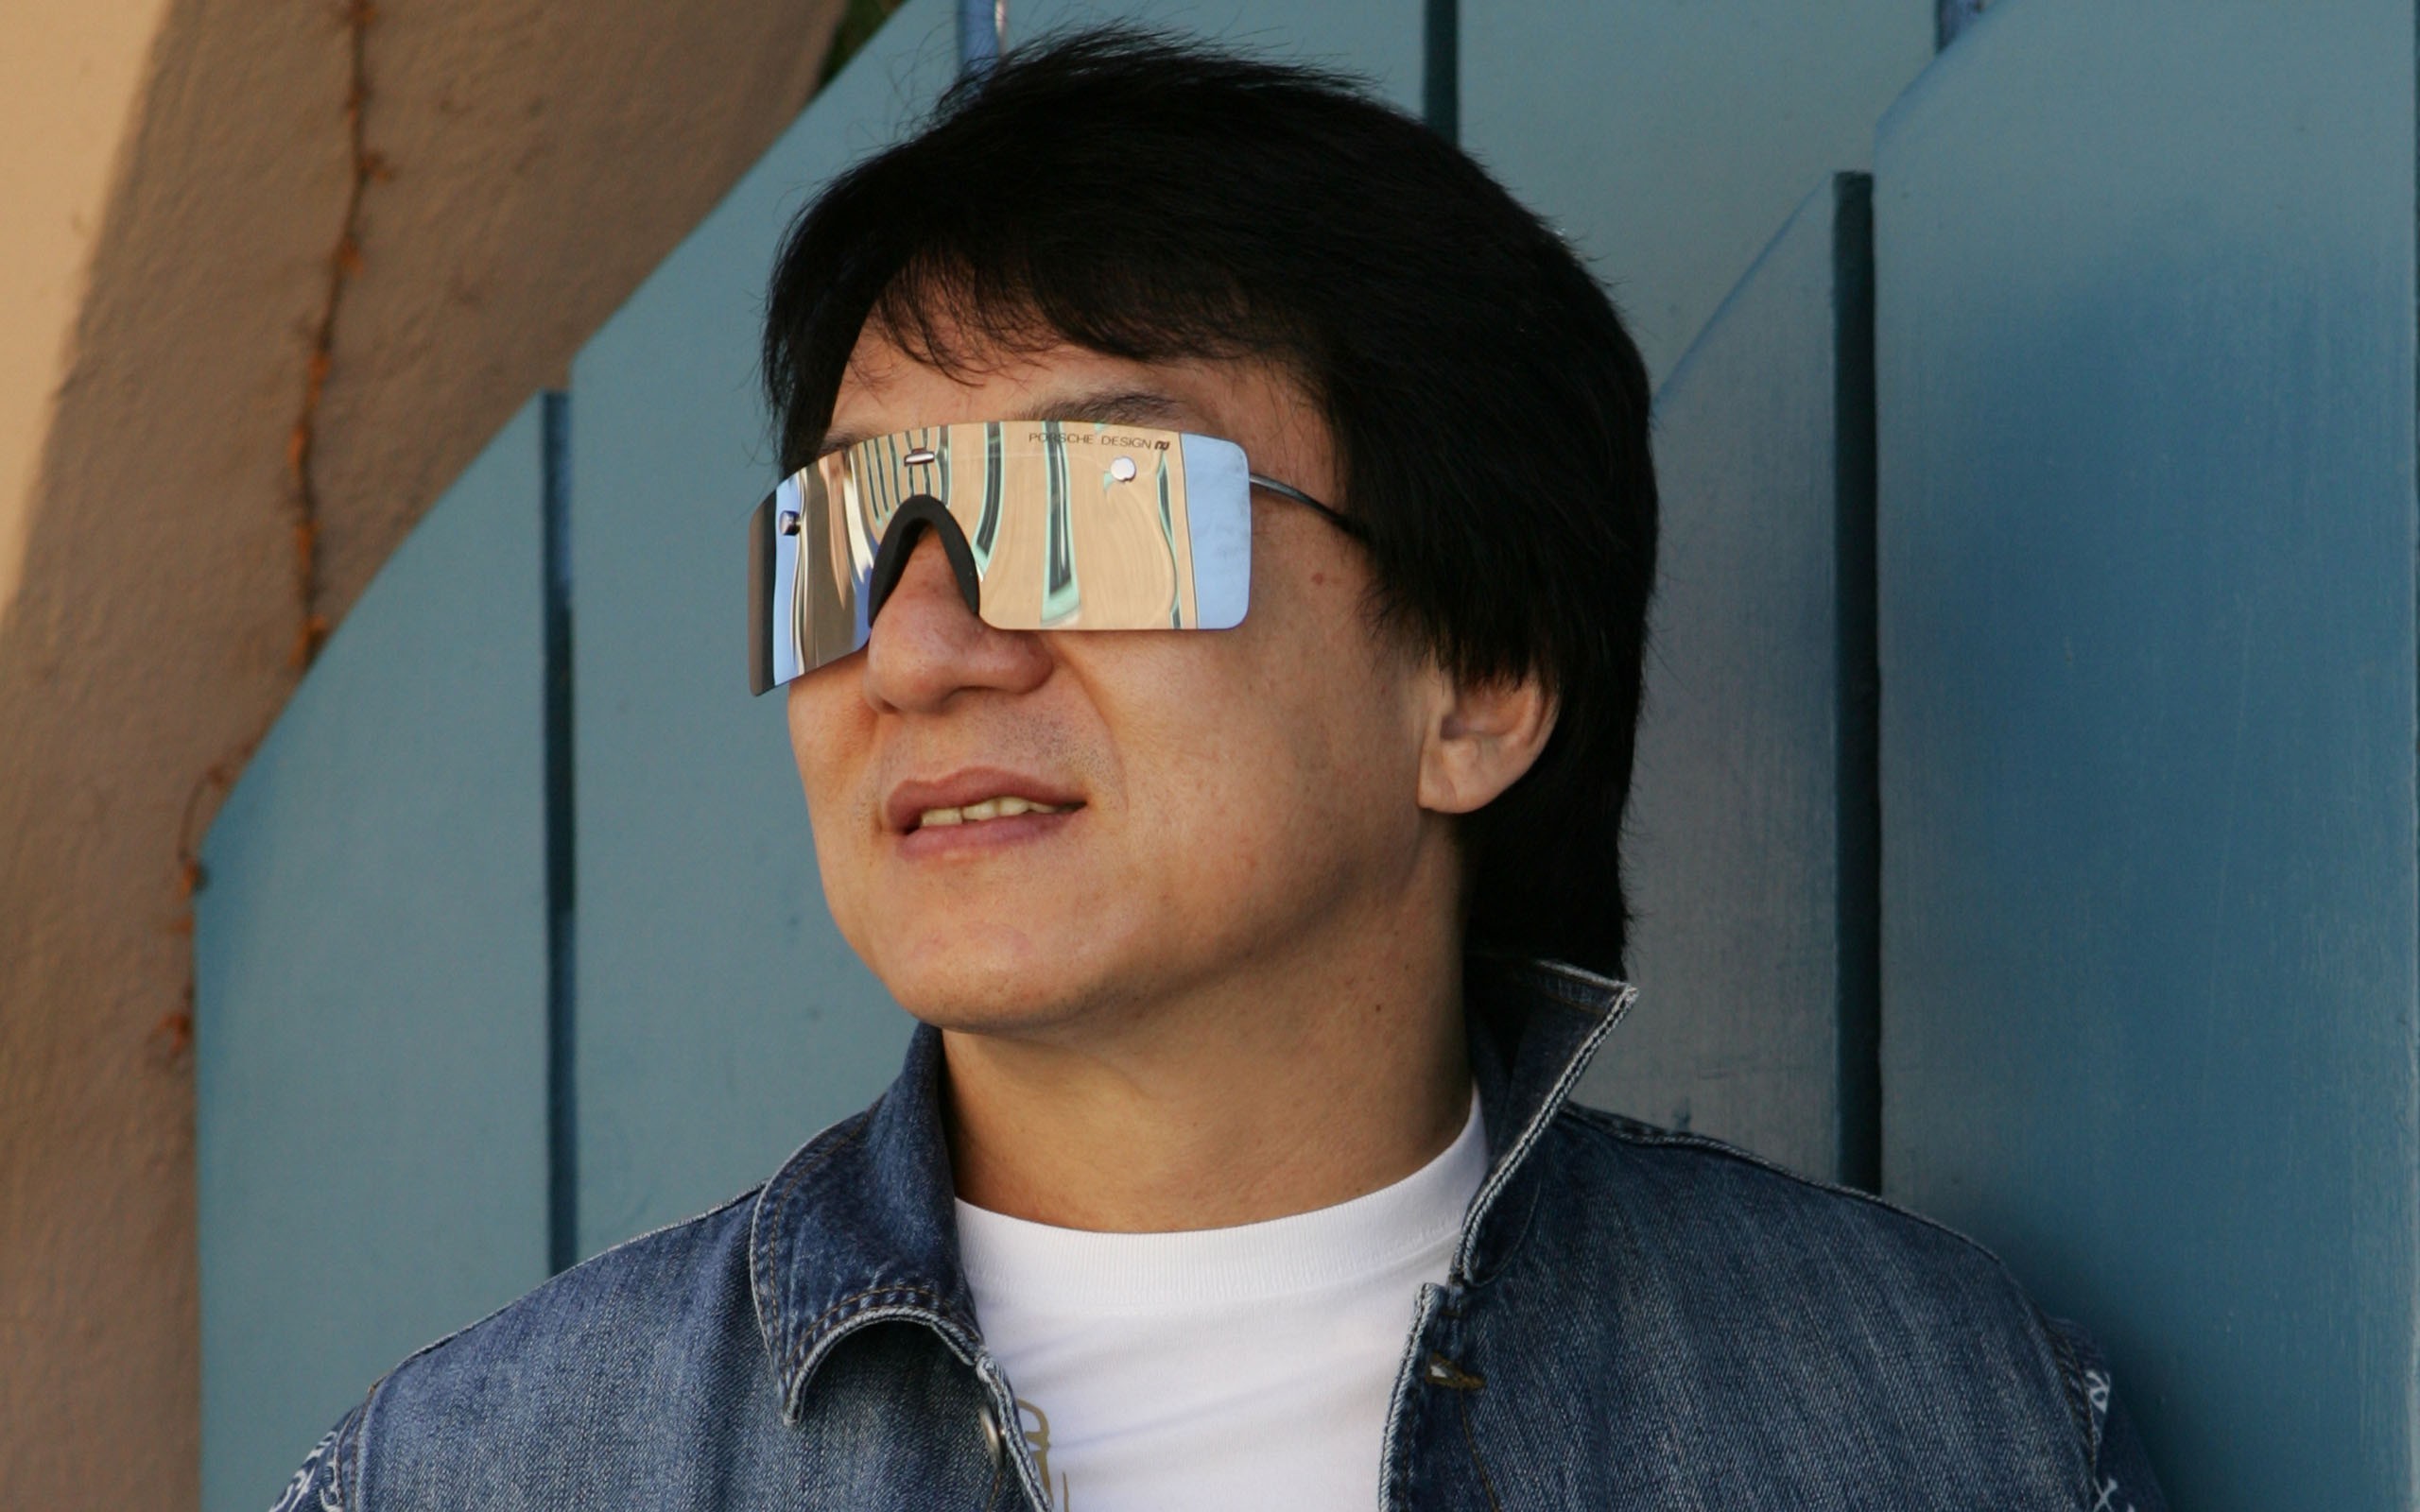 2560x1600 Jackie Chan Glasses Wallpaper Background 54870